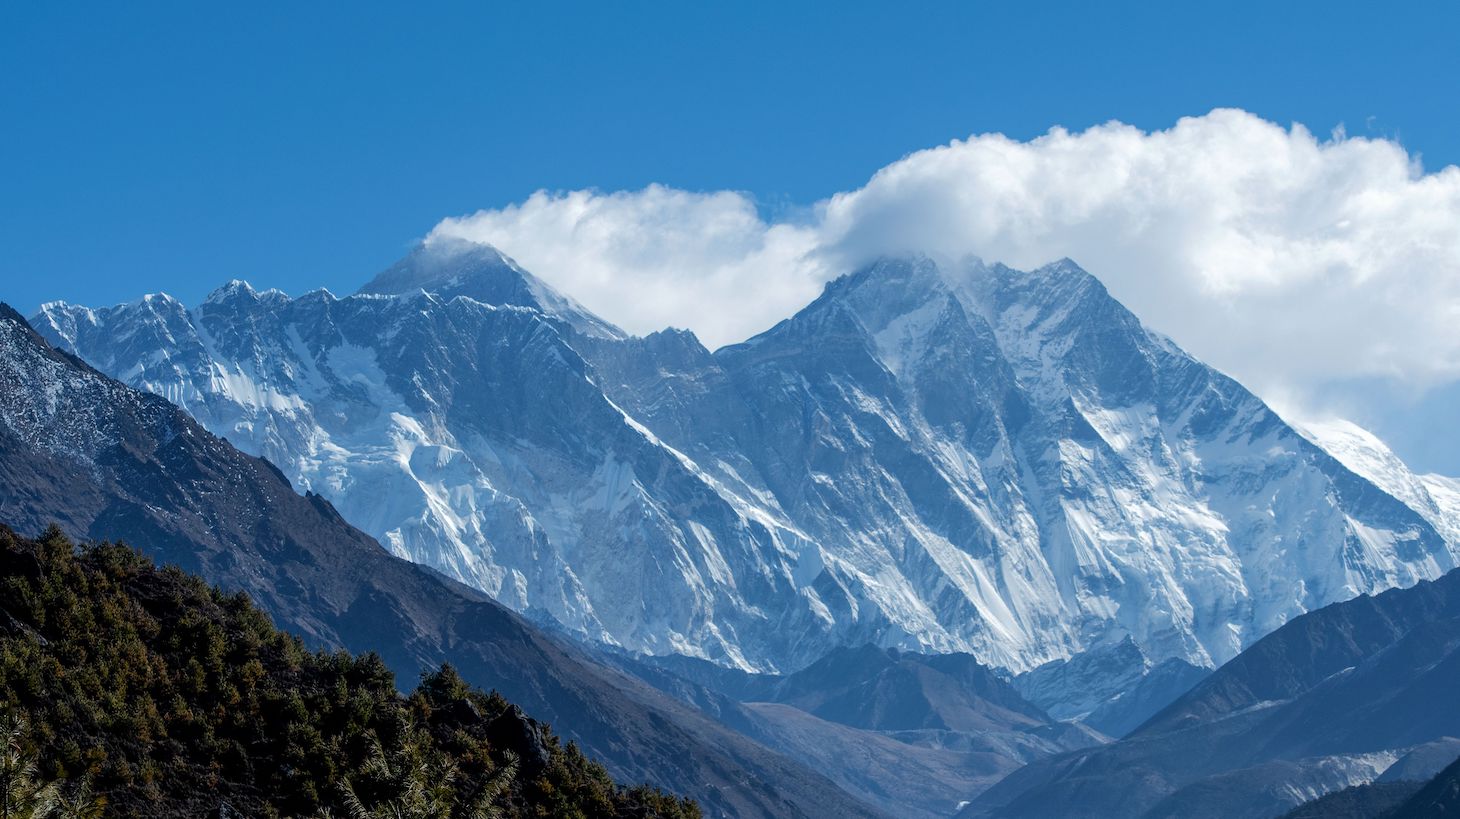 The Himalayan Mount Everest (C-L) and other mounts ranges are pictured from Namche Bazar in the Everest region, some 140 kms northeast of Kathmandu on March 26, 2020. (Photo by PRAKASH MATHEMA / AFP) (Photo by PRAKASH MATHEMA/AFP via Getty Images)